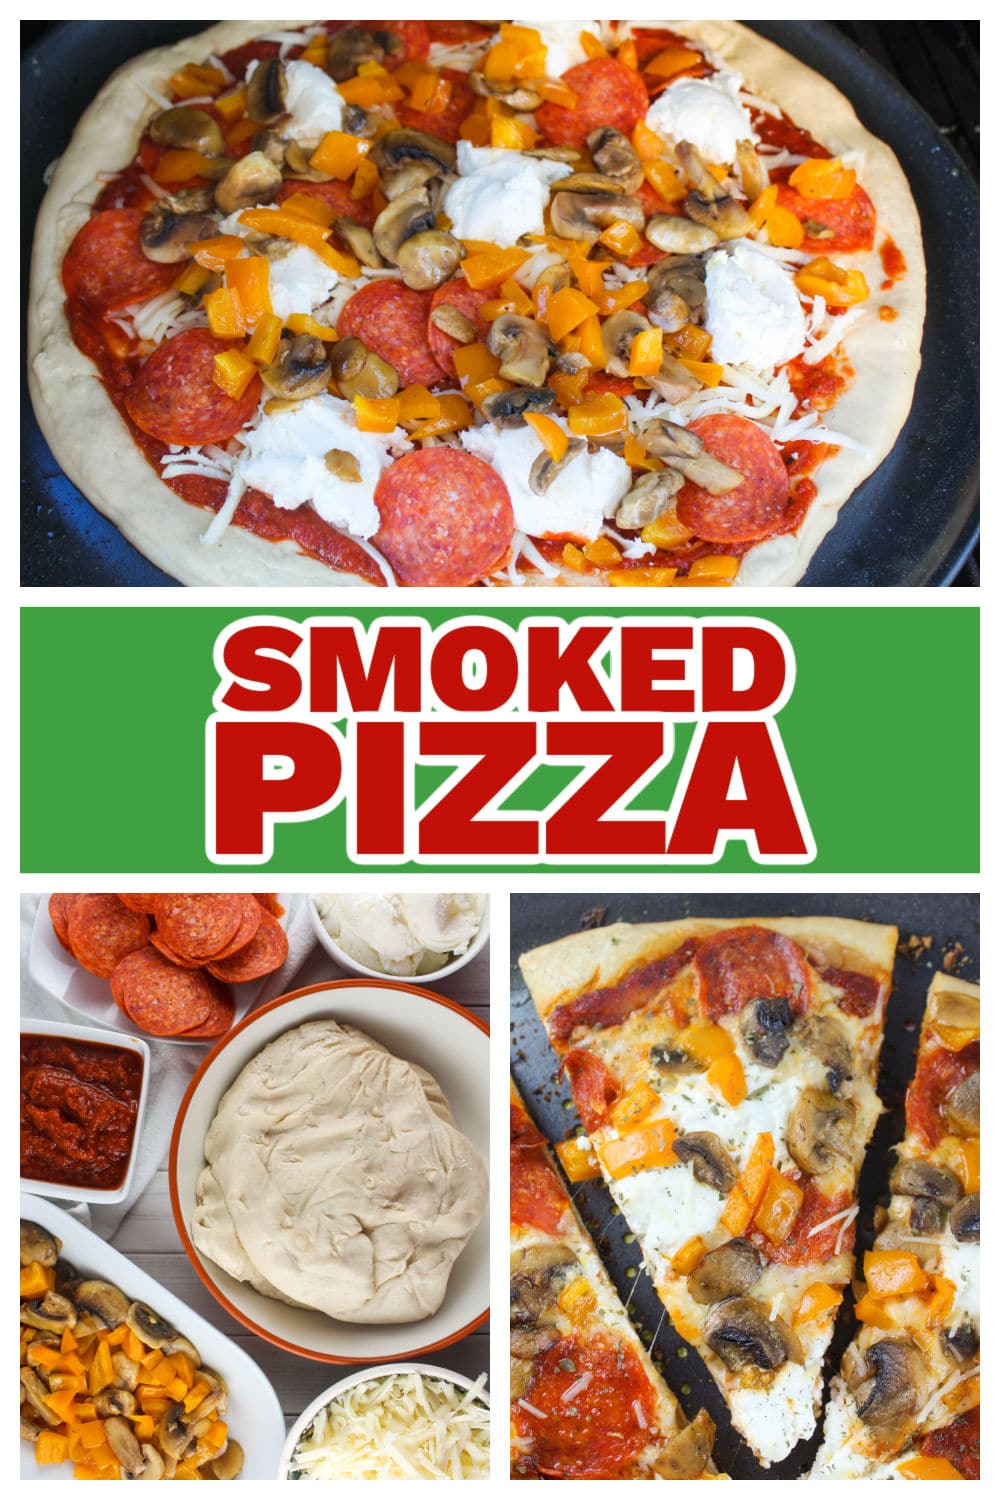 Making pizza on your smoker is really easy and I think the best part is the crust! You'll have the best baked and crispiest crust!  via @foodhussy